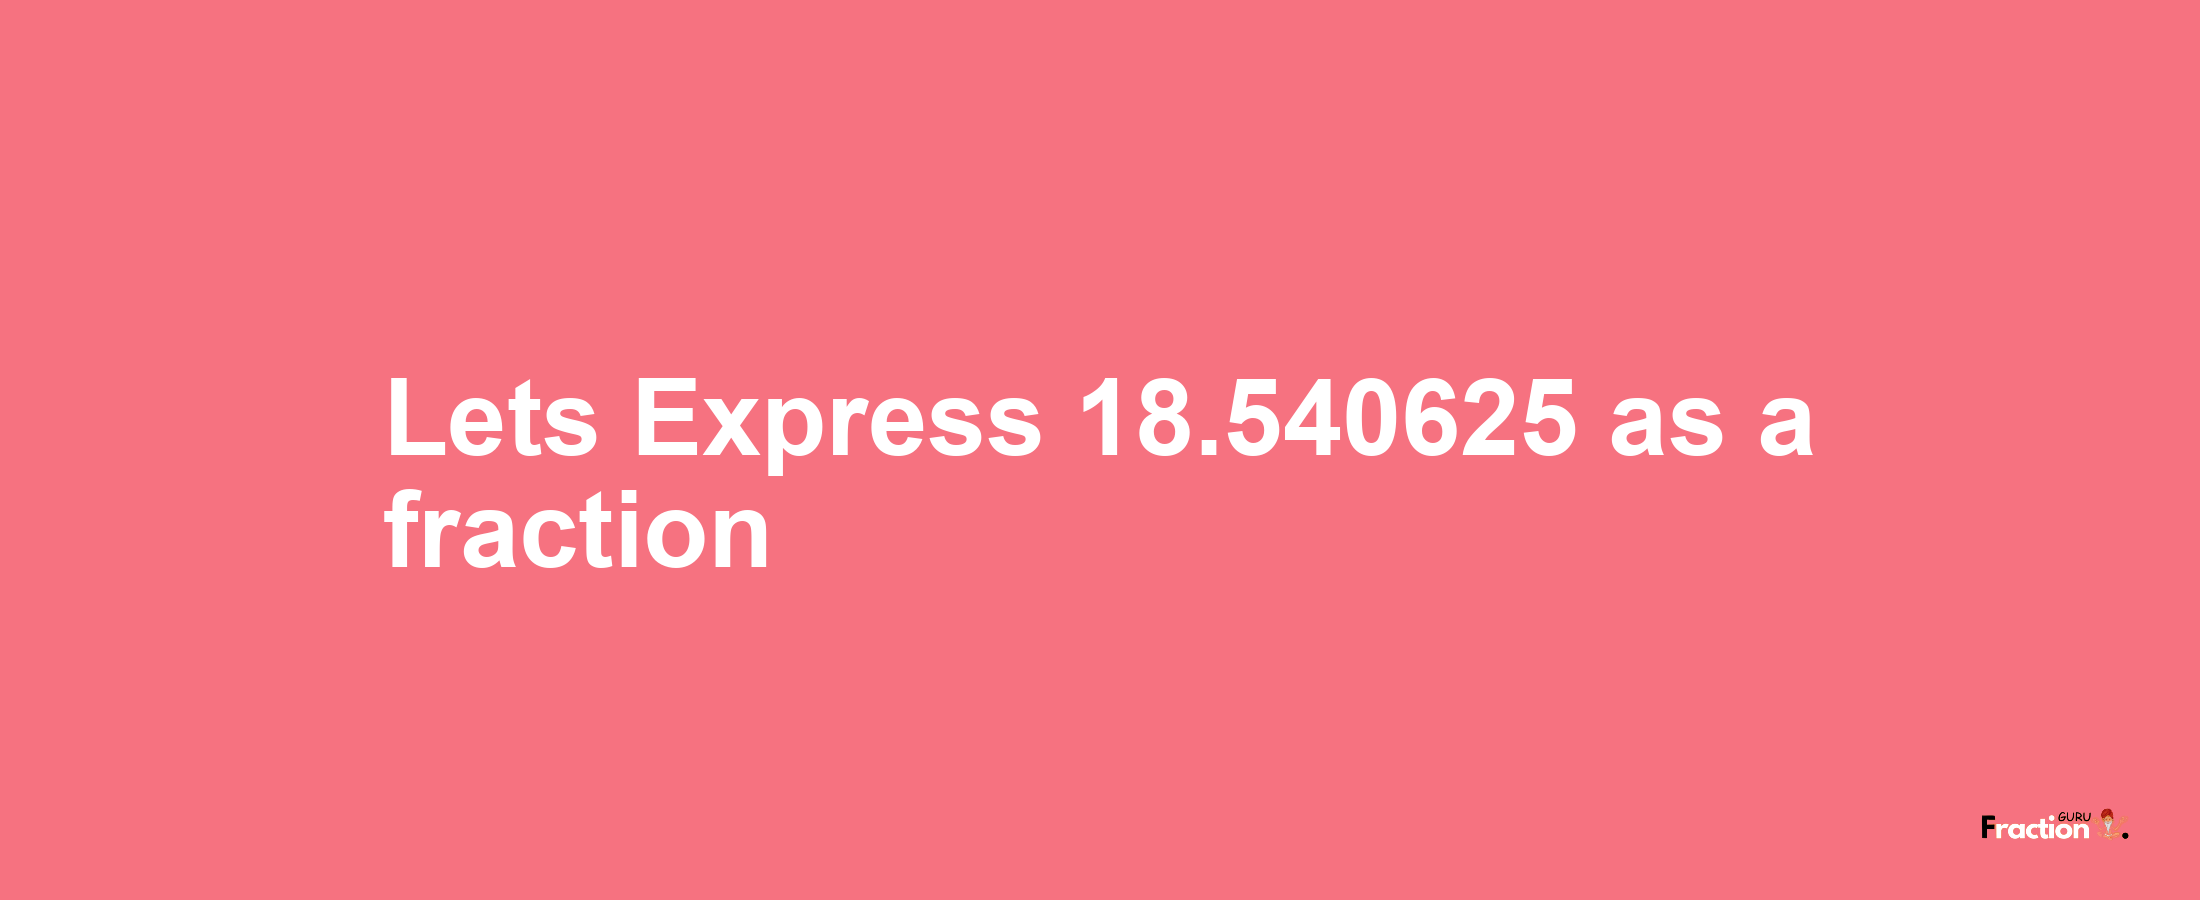 Lets Express 18.540625 as afraction